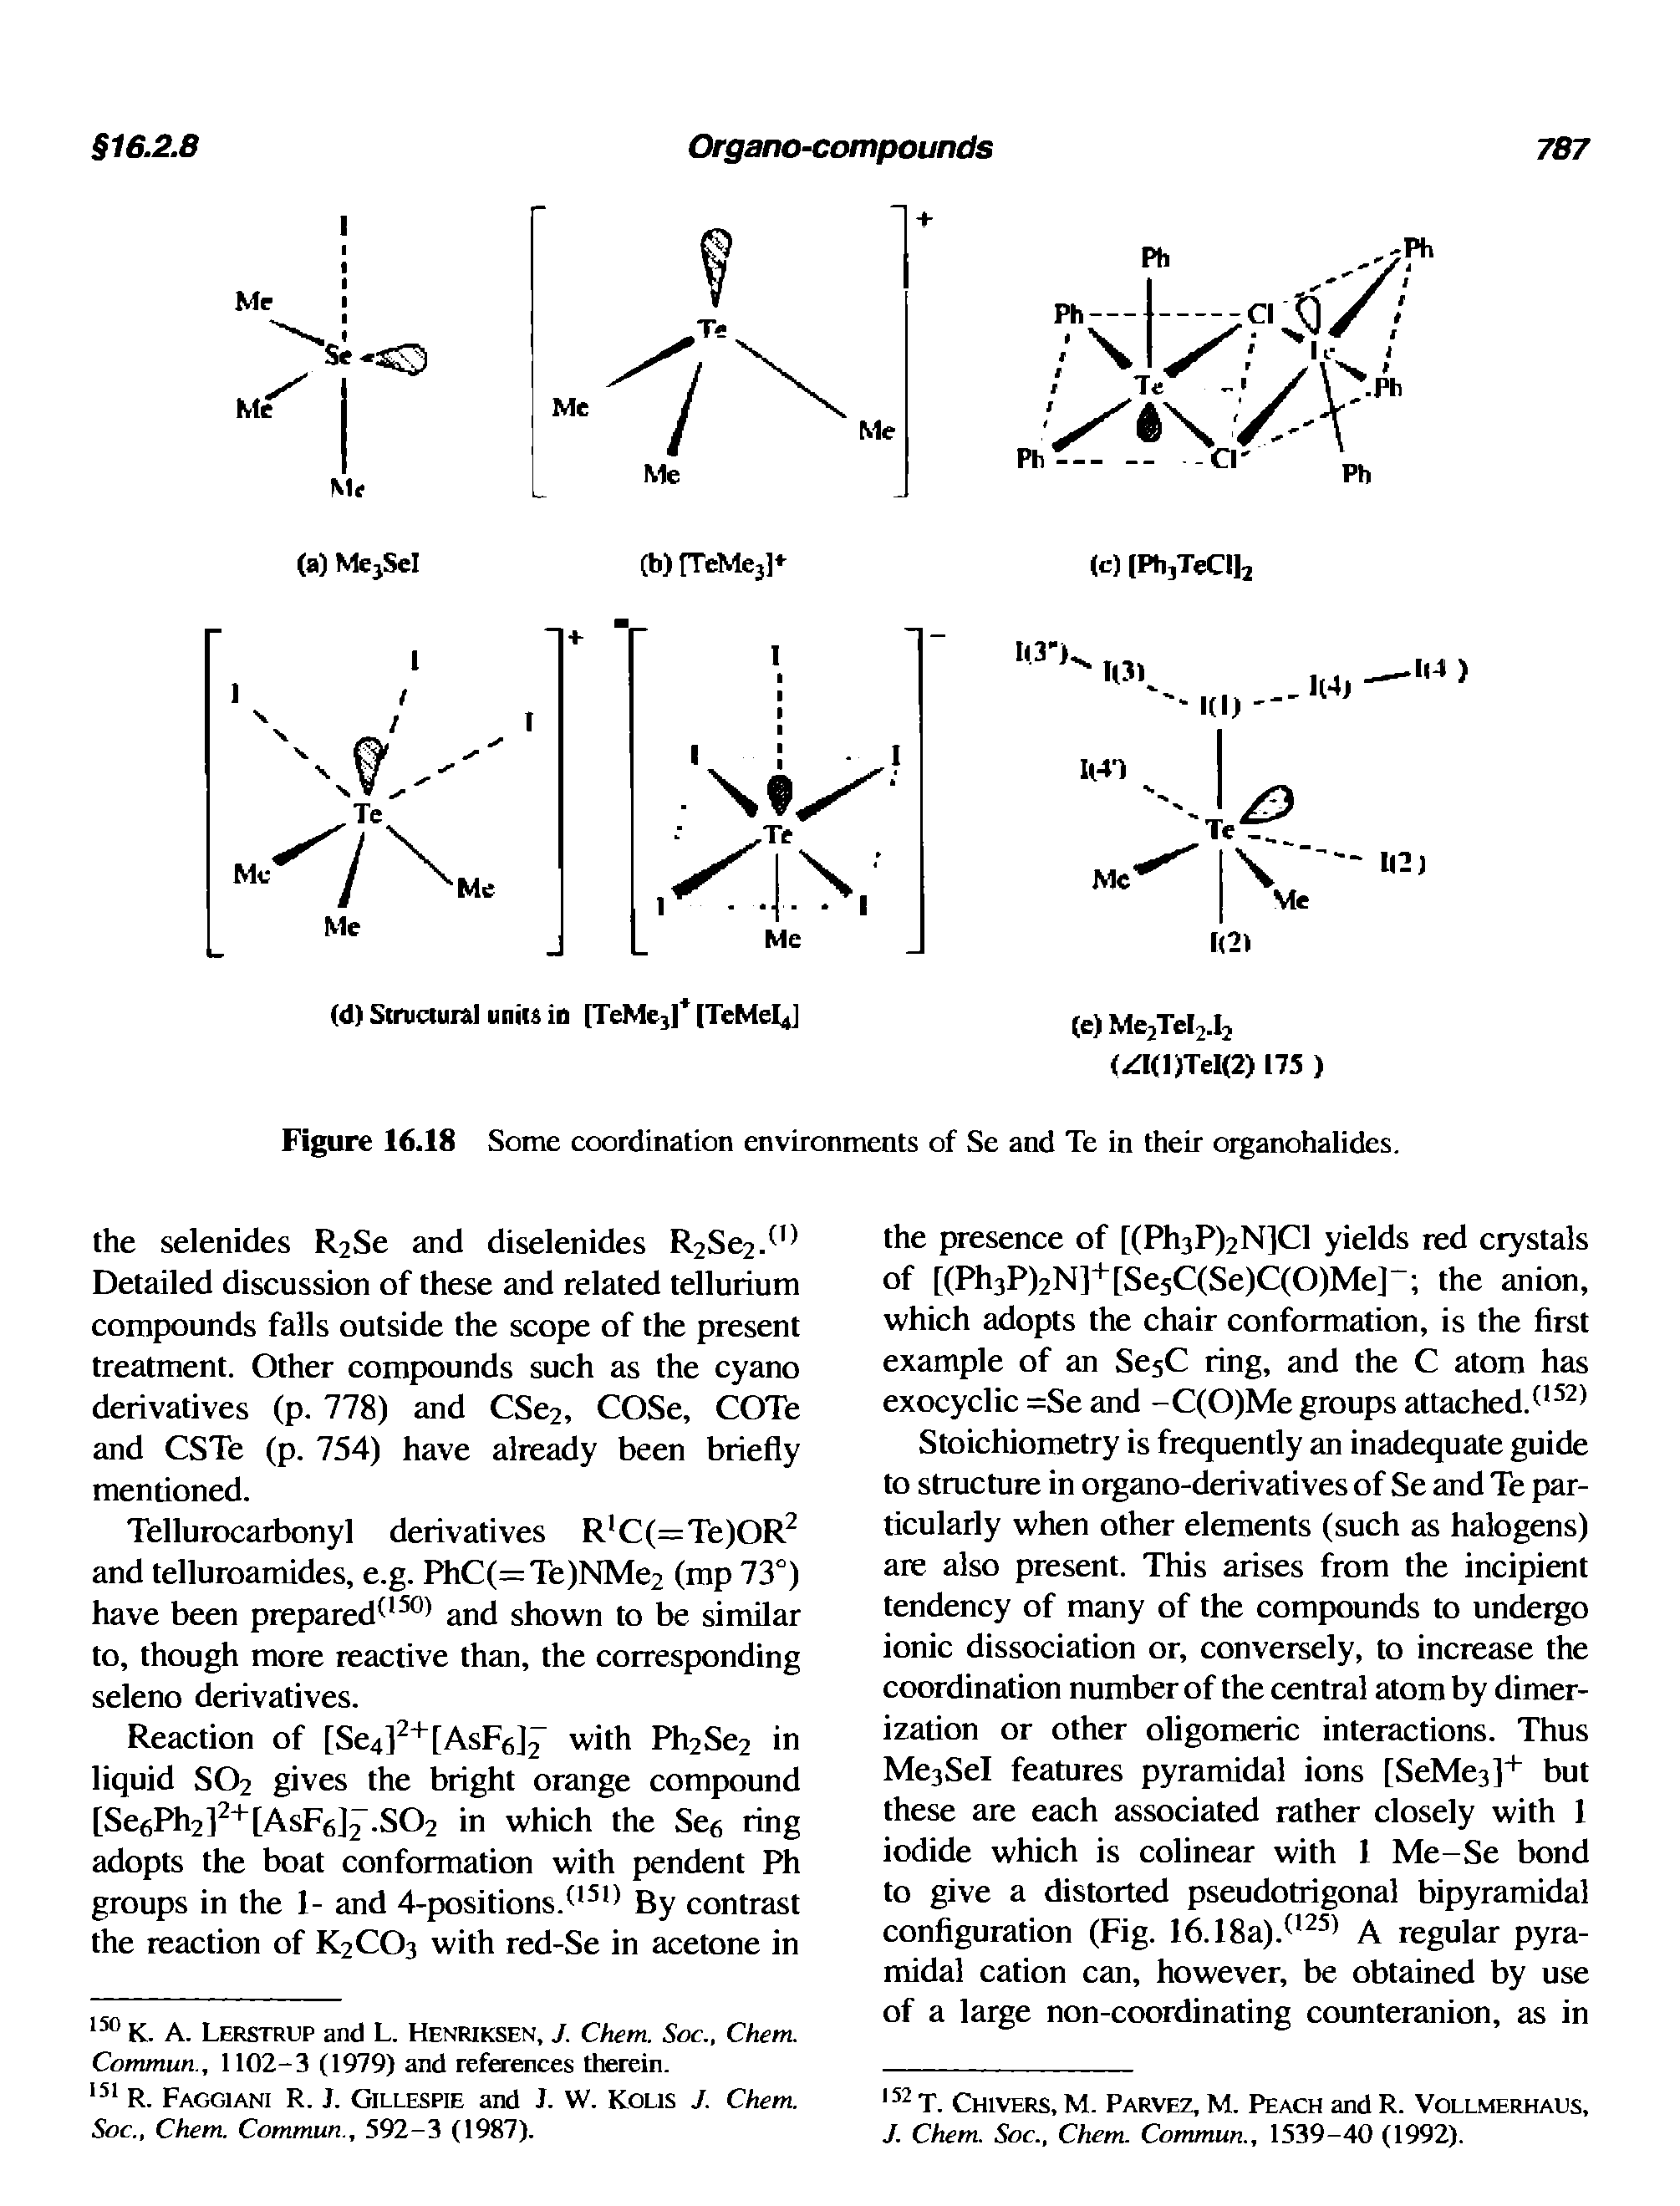 Figure 16.18 Some coordination environments of Se and Te in their organohalides.